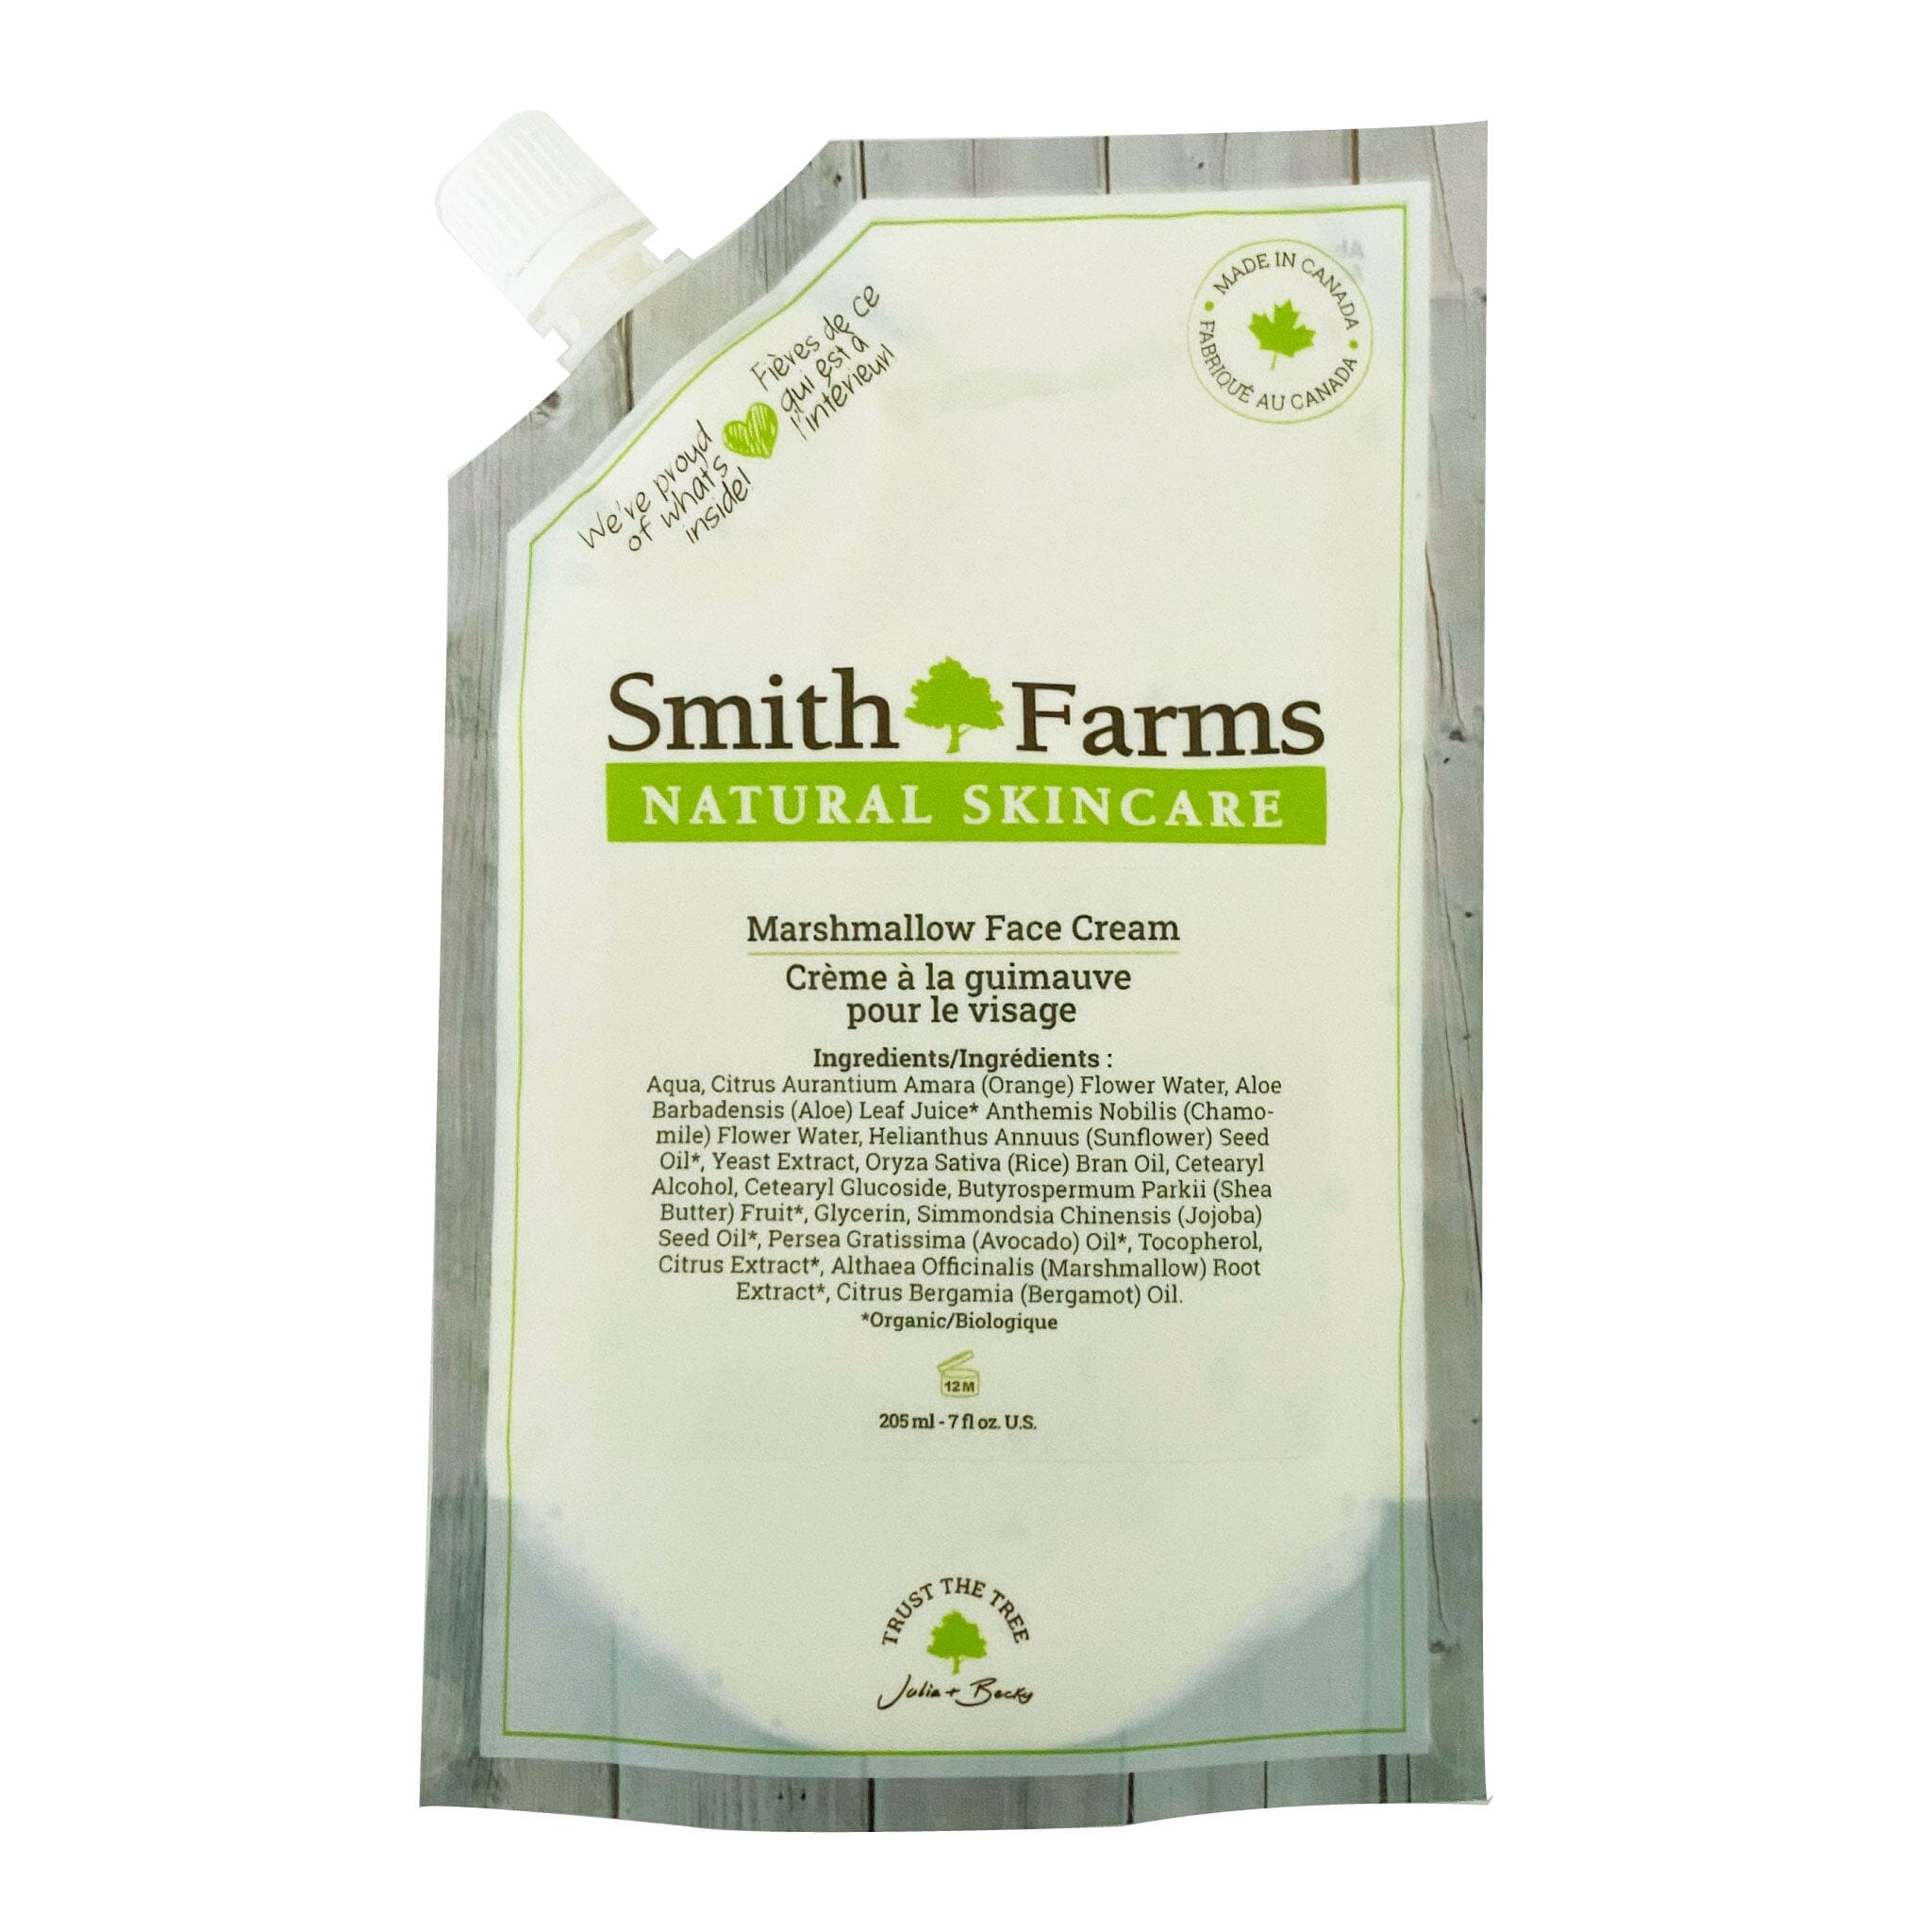 Marshmallow Face Cream Face Care, Our Products Smith Farms 205 ml (refill) 